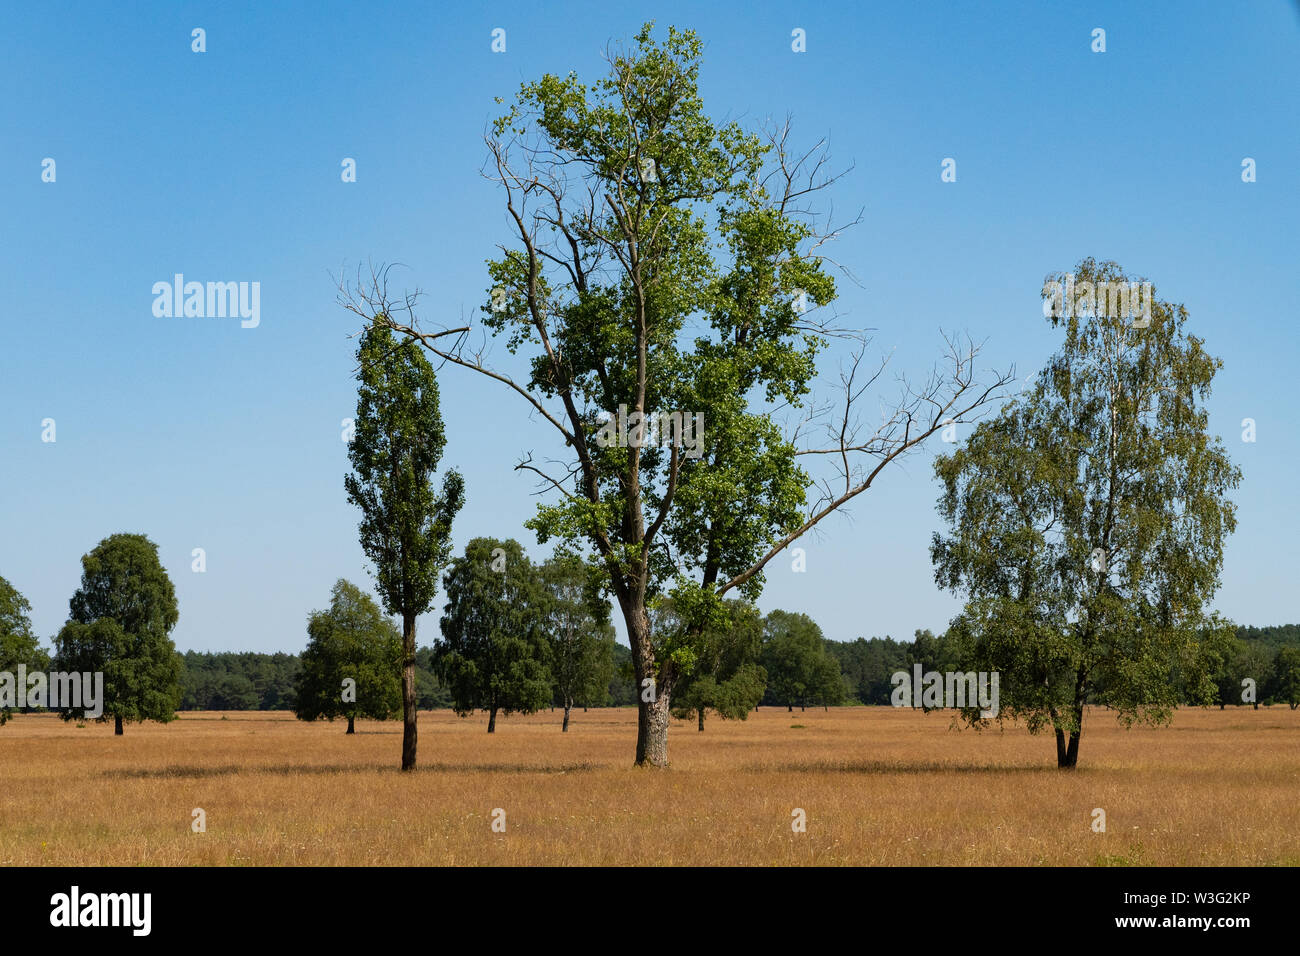 Some lonely trees on golden grass looking like a savanna - grass desert Stock Photo